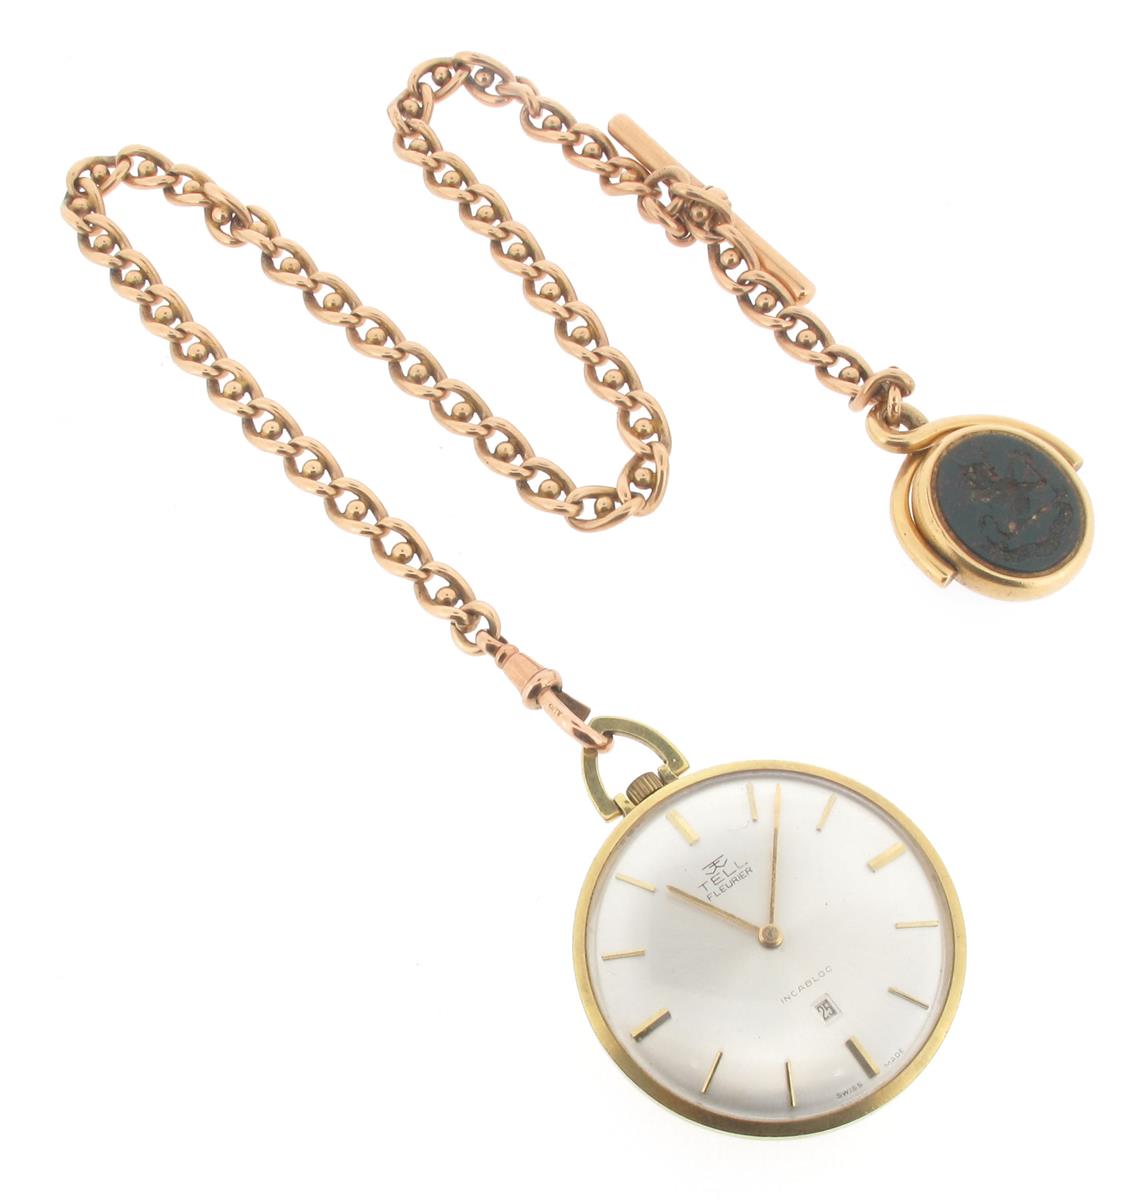 An open-faced gilt metal stem-wind pocket watch, 4cm wide, silver dial with gold bar numerals.